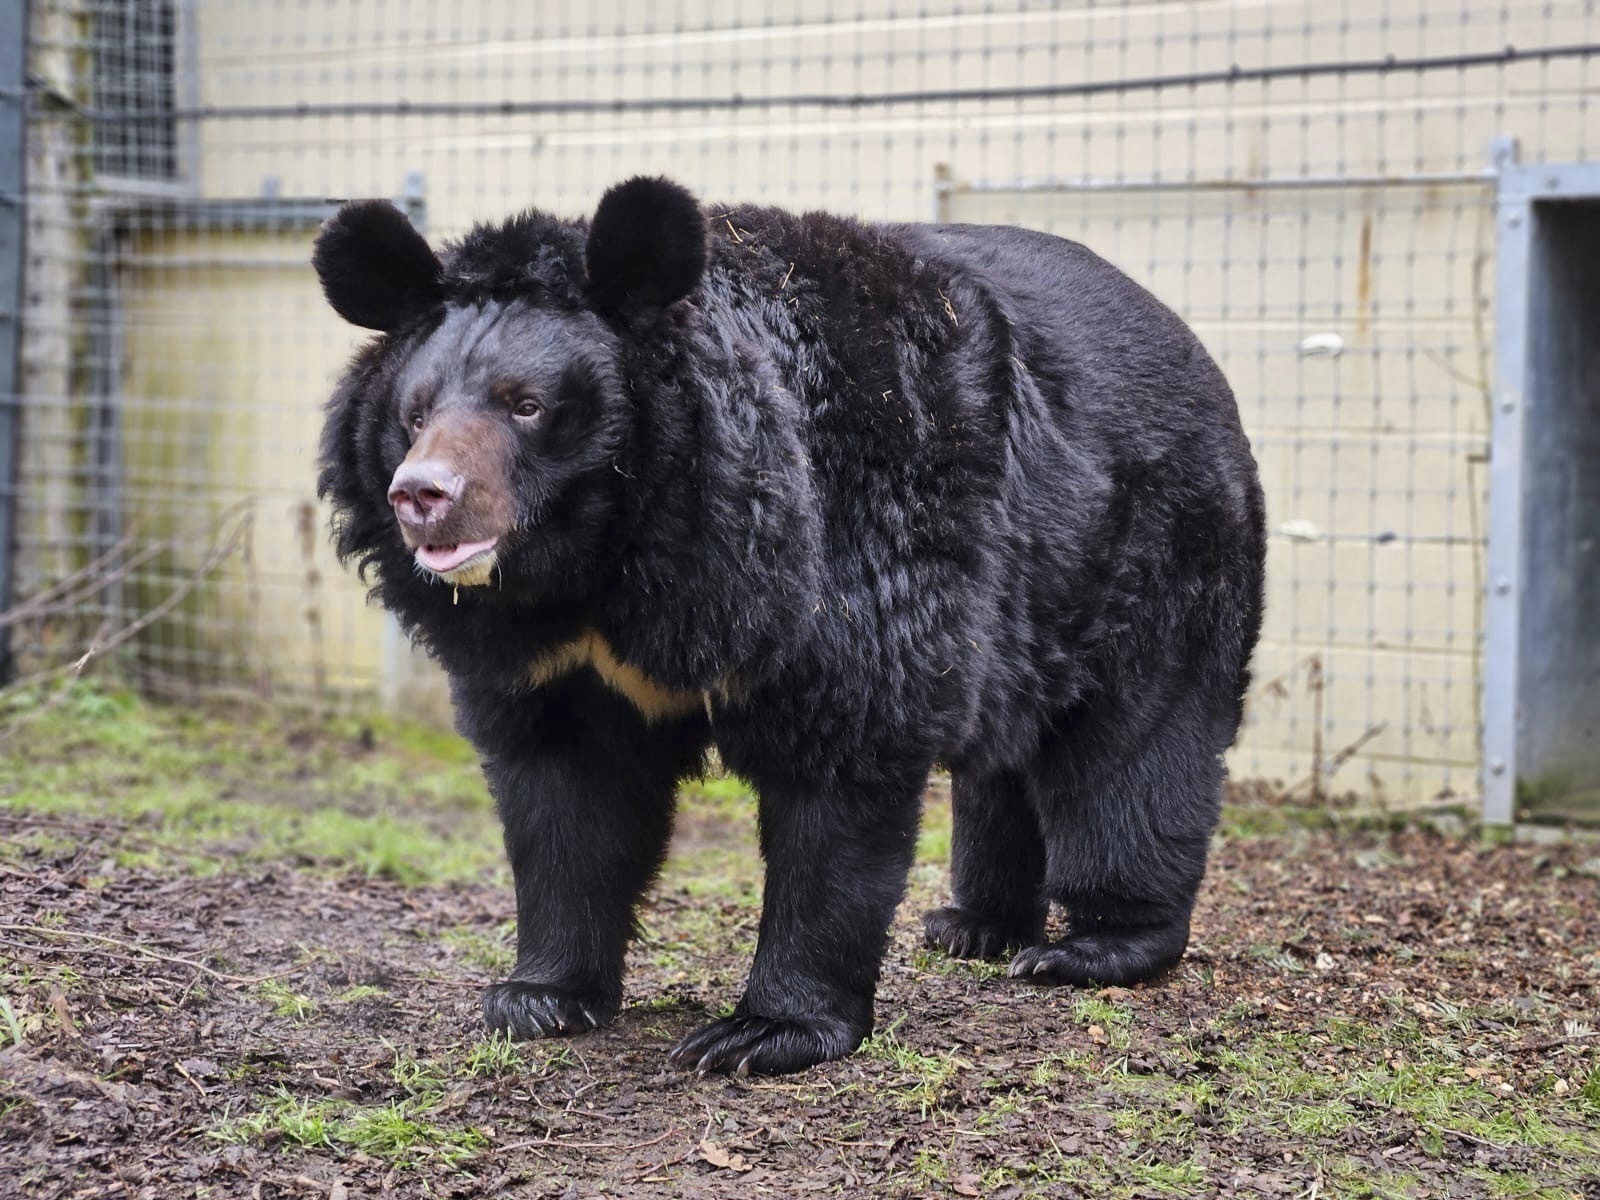 A refugee bear from a bombed-out Ukraine zoo finds a new home in